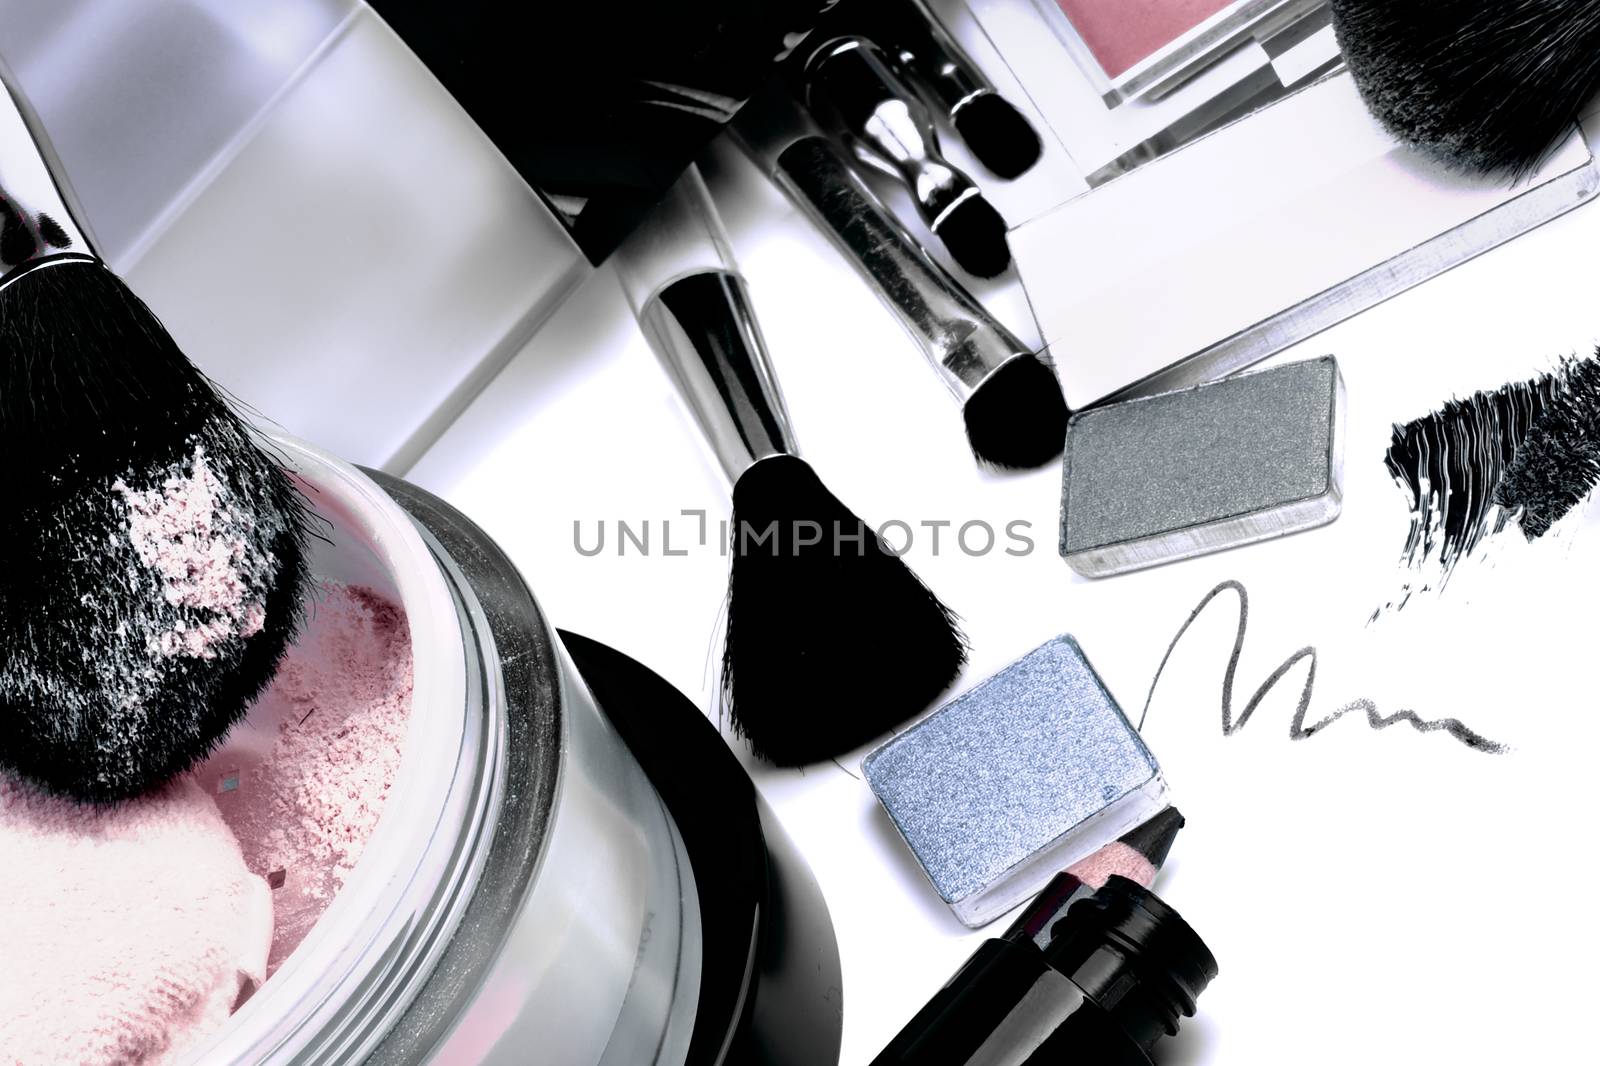 Arrangement of Make up Products by zhekos